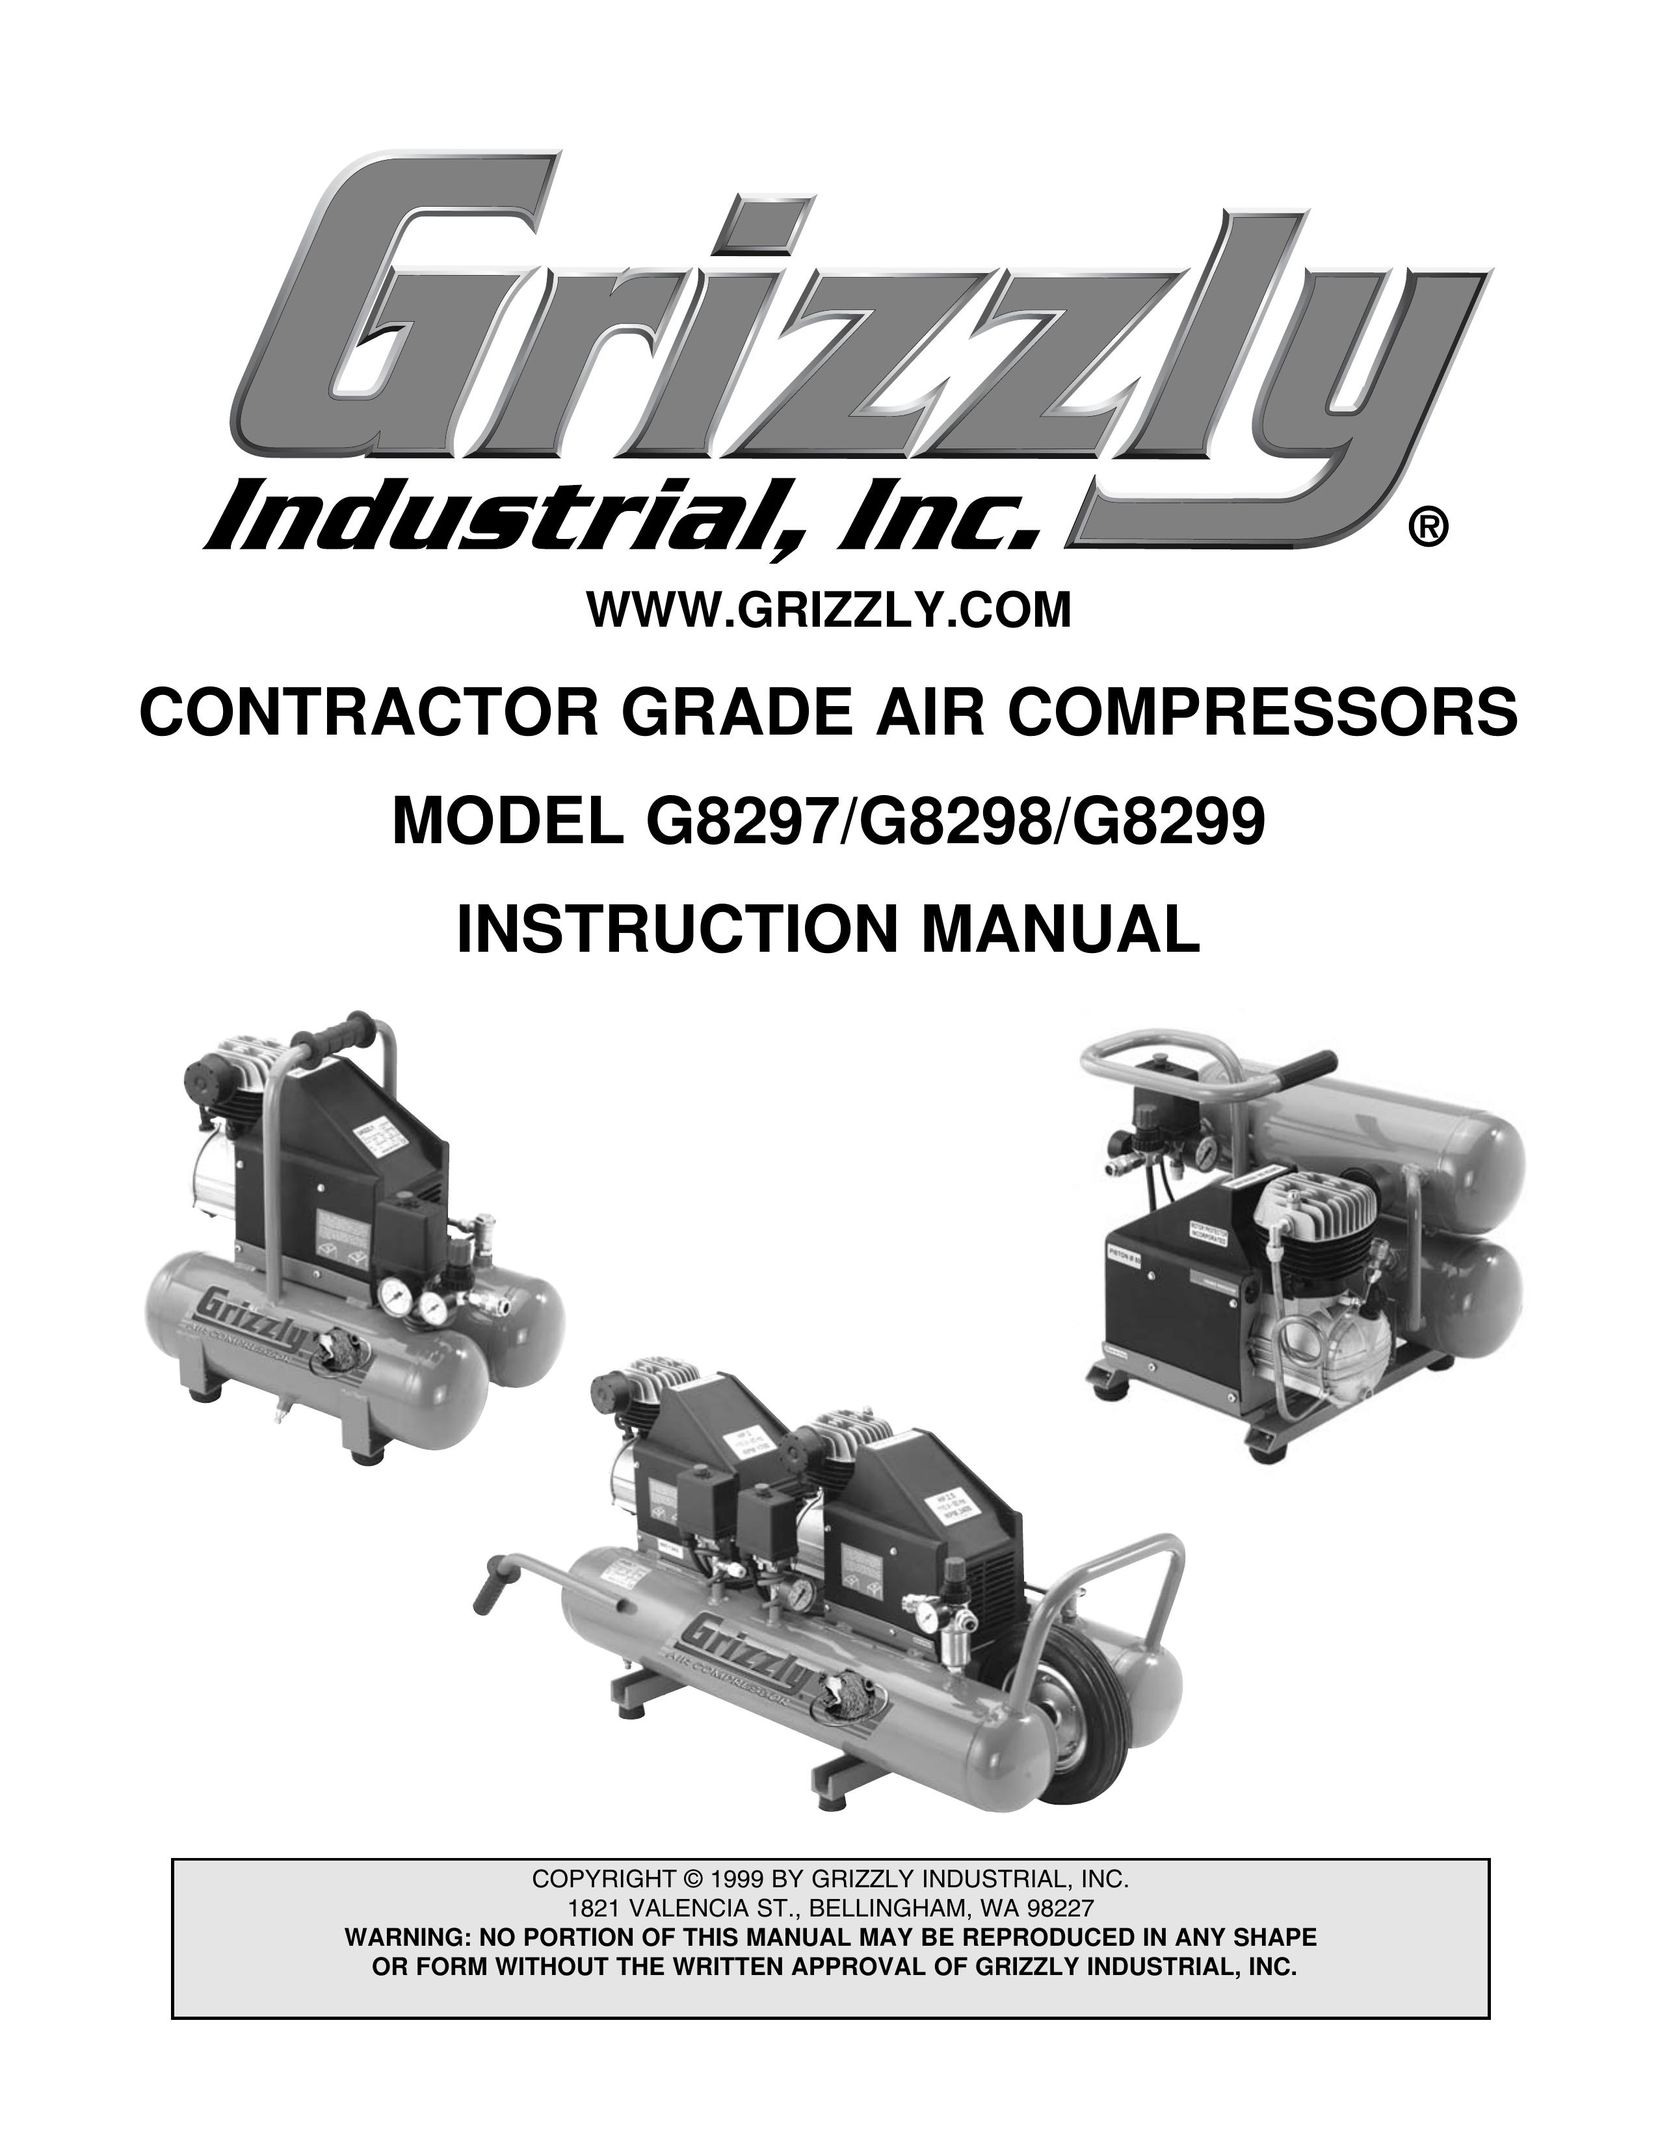 Grizzly G8298 Air Compressor User Manual